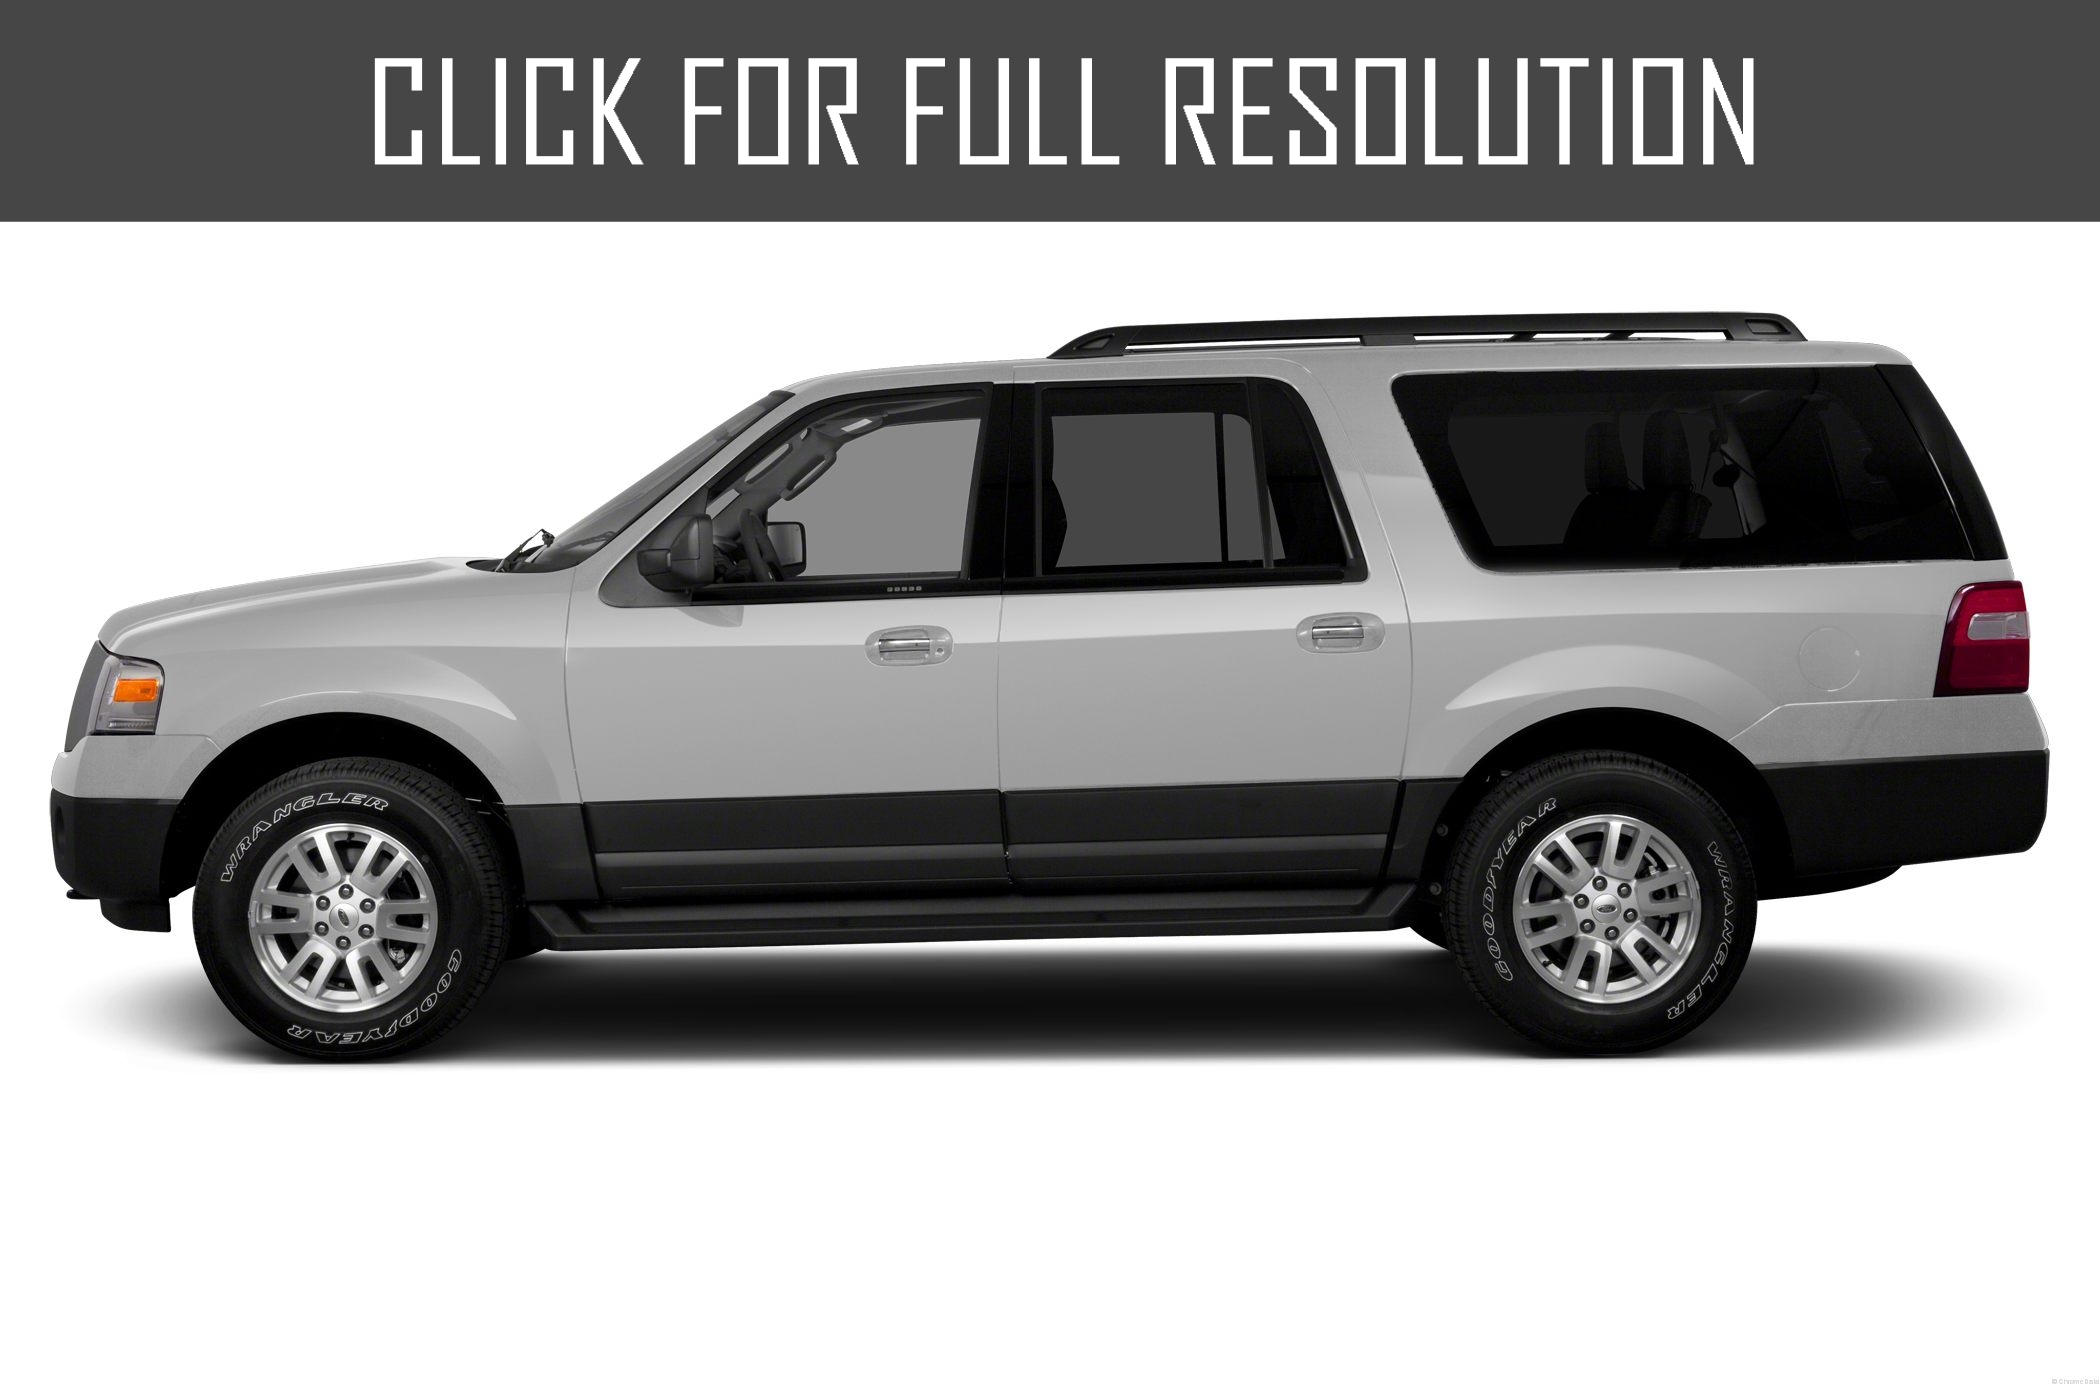 Ford Expedition 2013